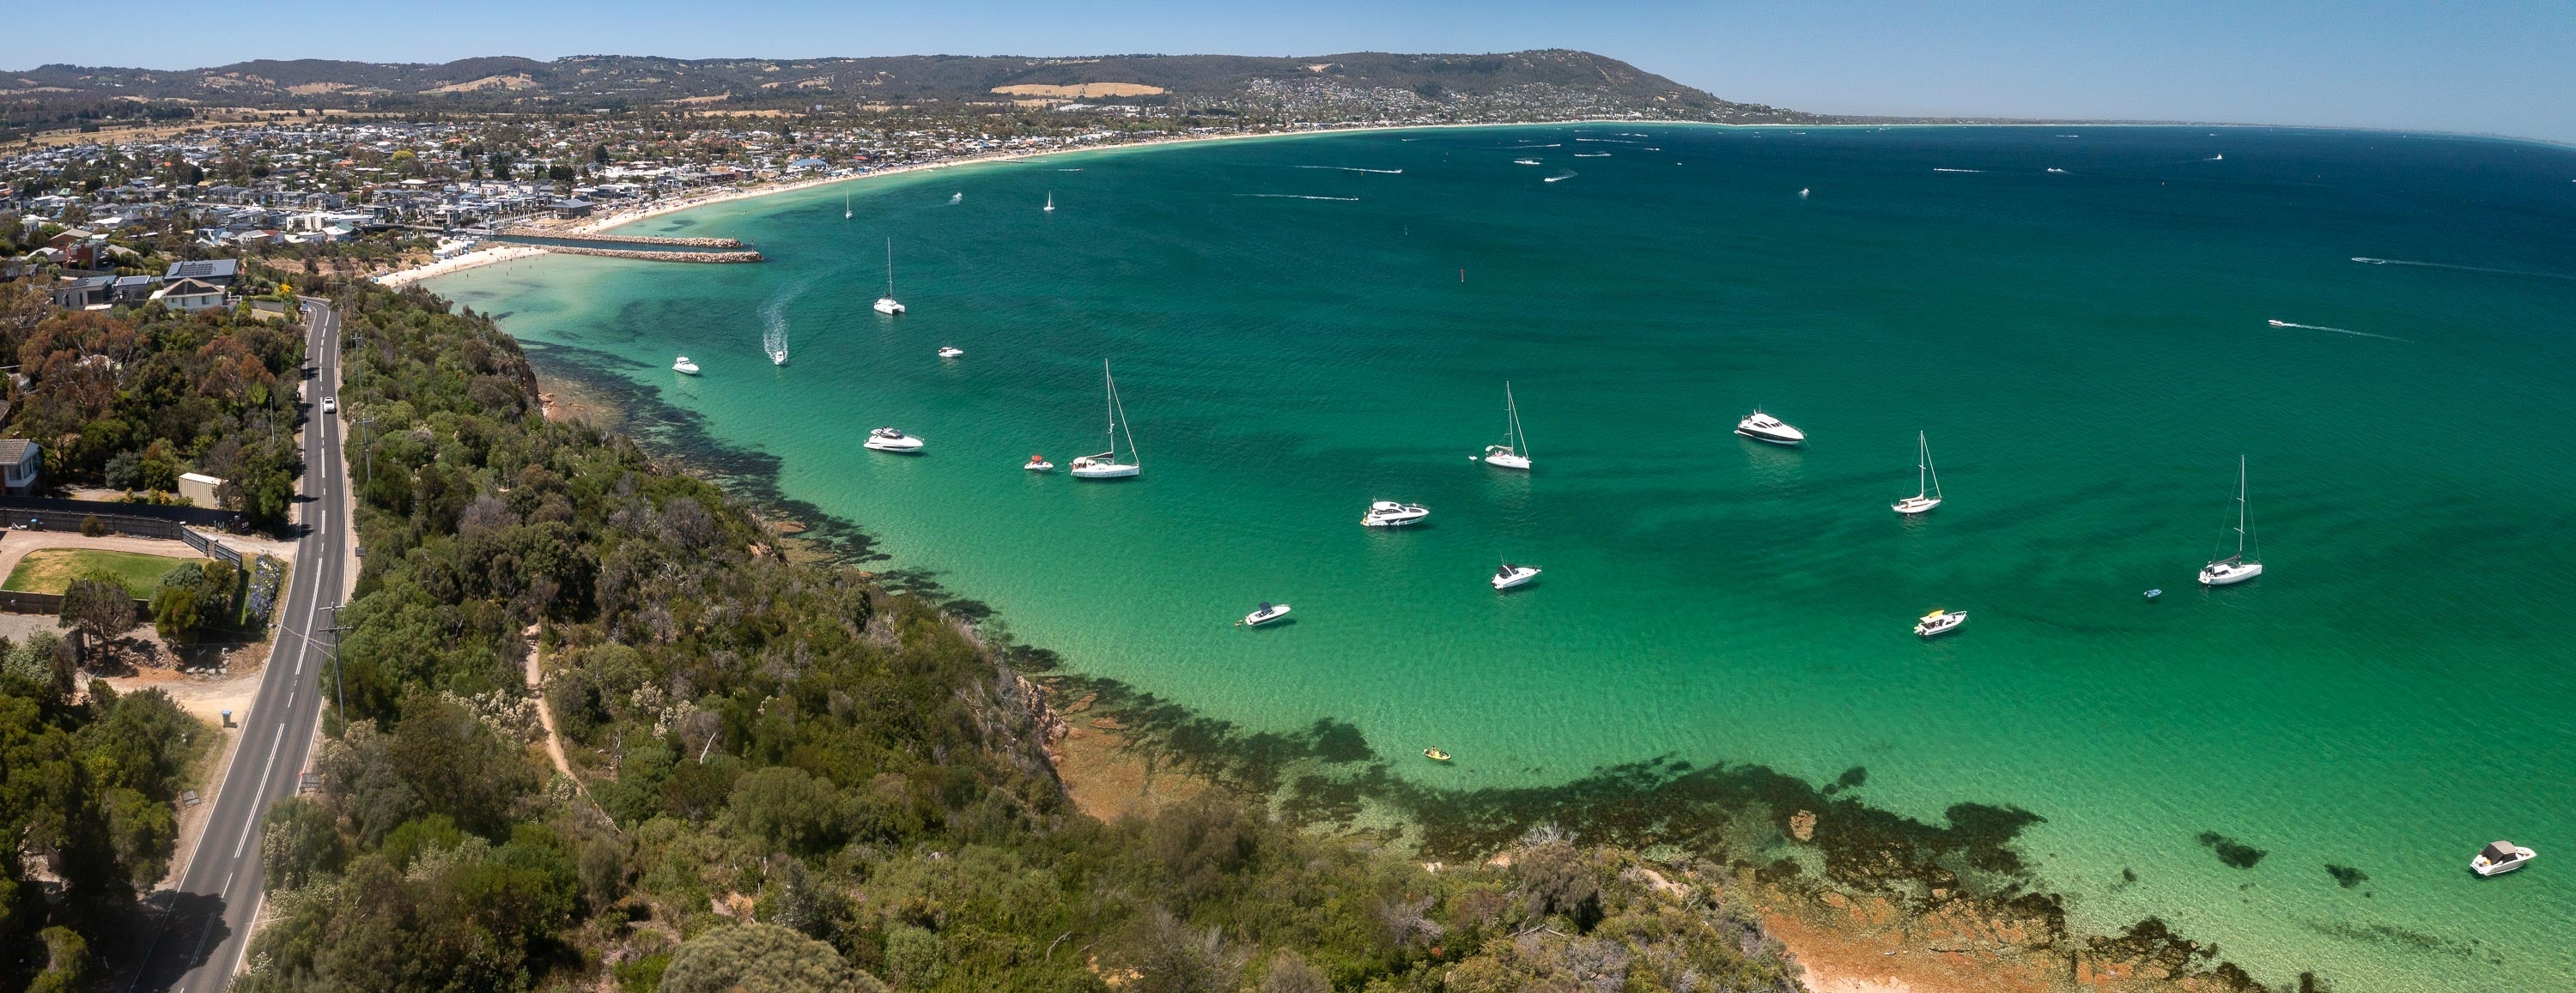 Tassells Cove, Mount Martha from above